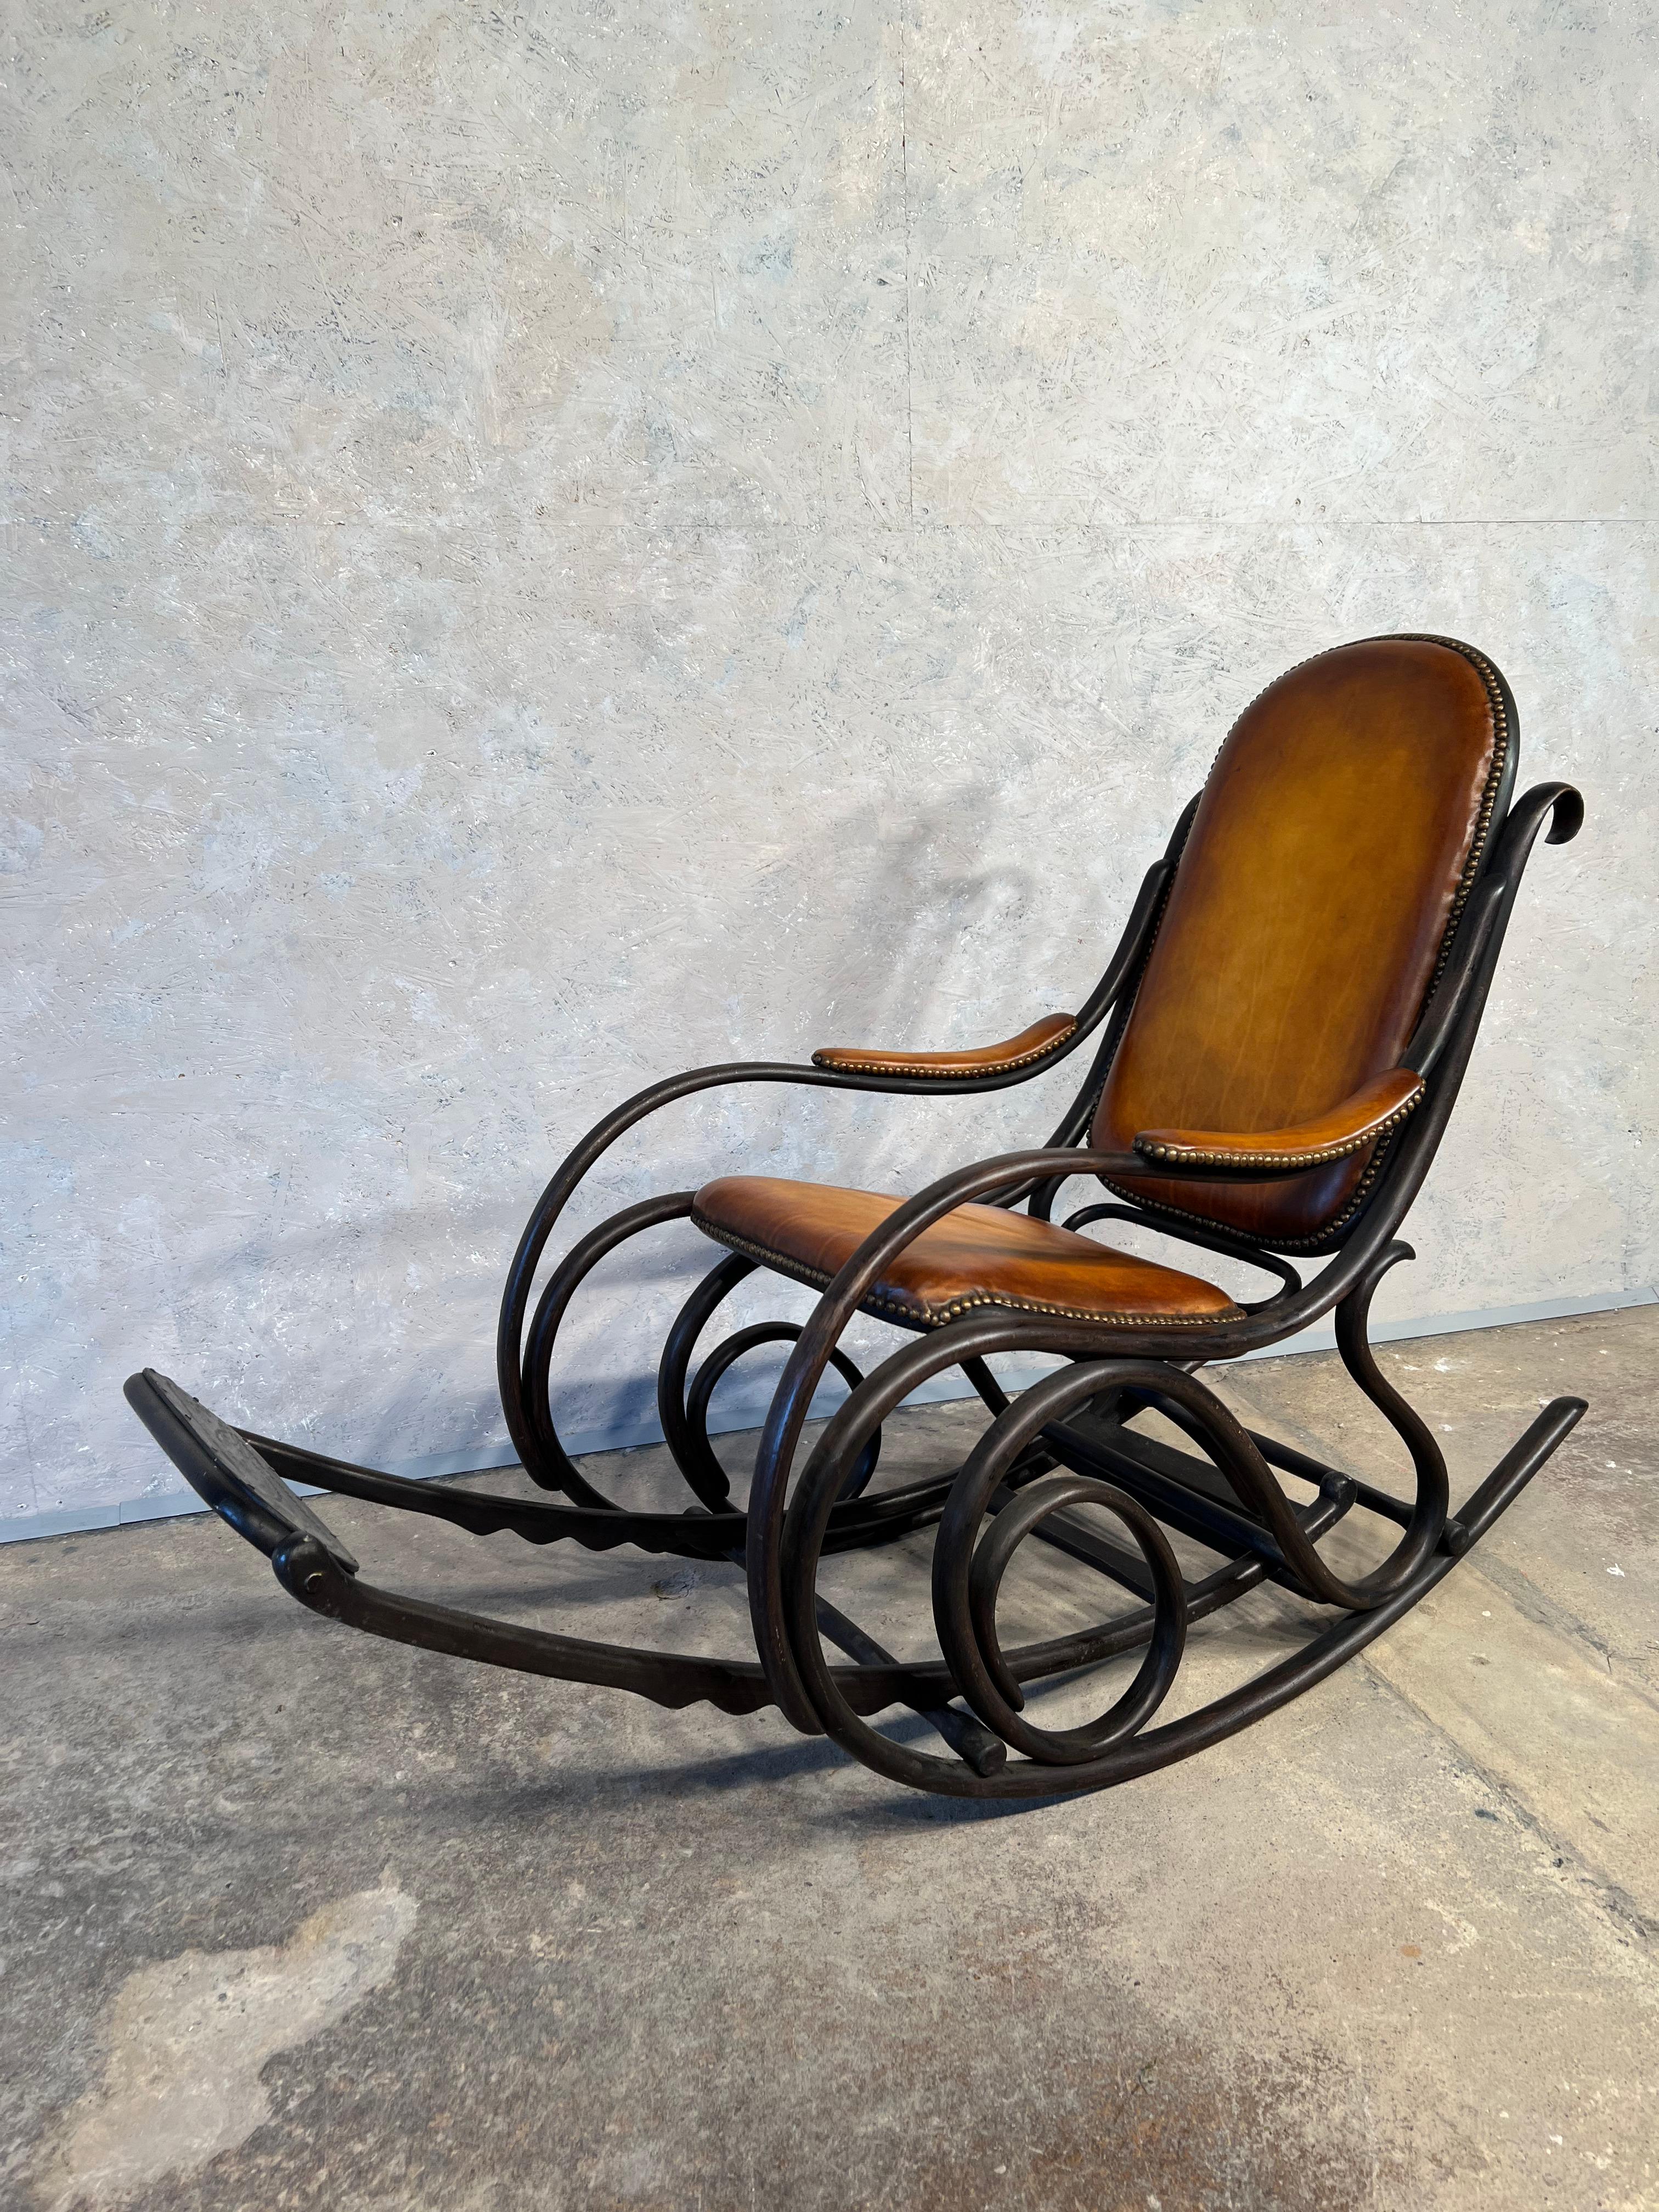 upholstered bentwood rocking chair